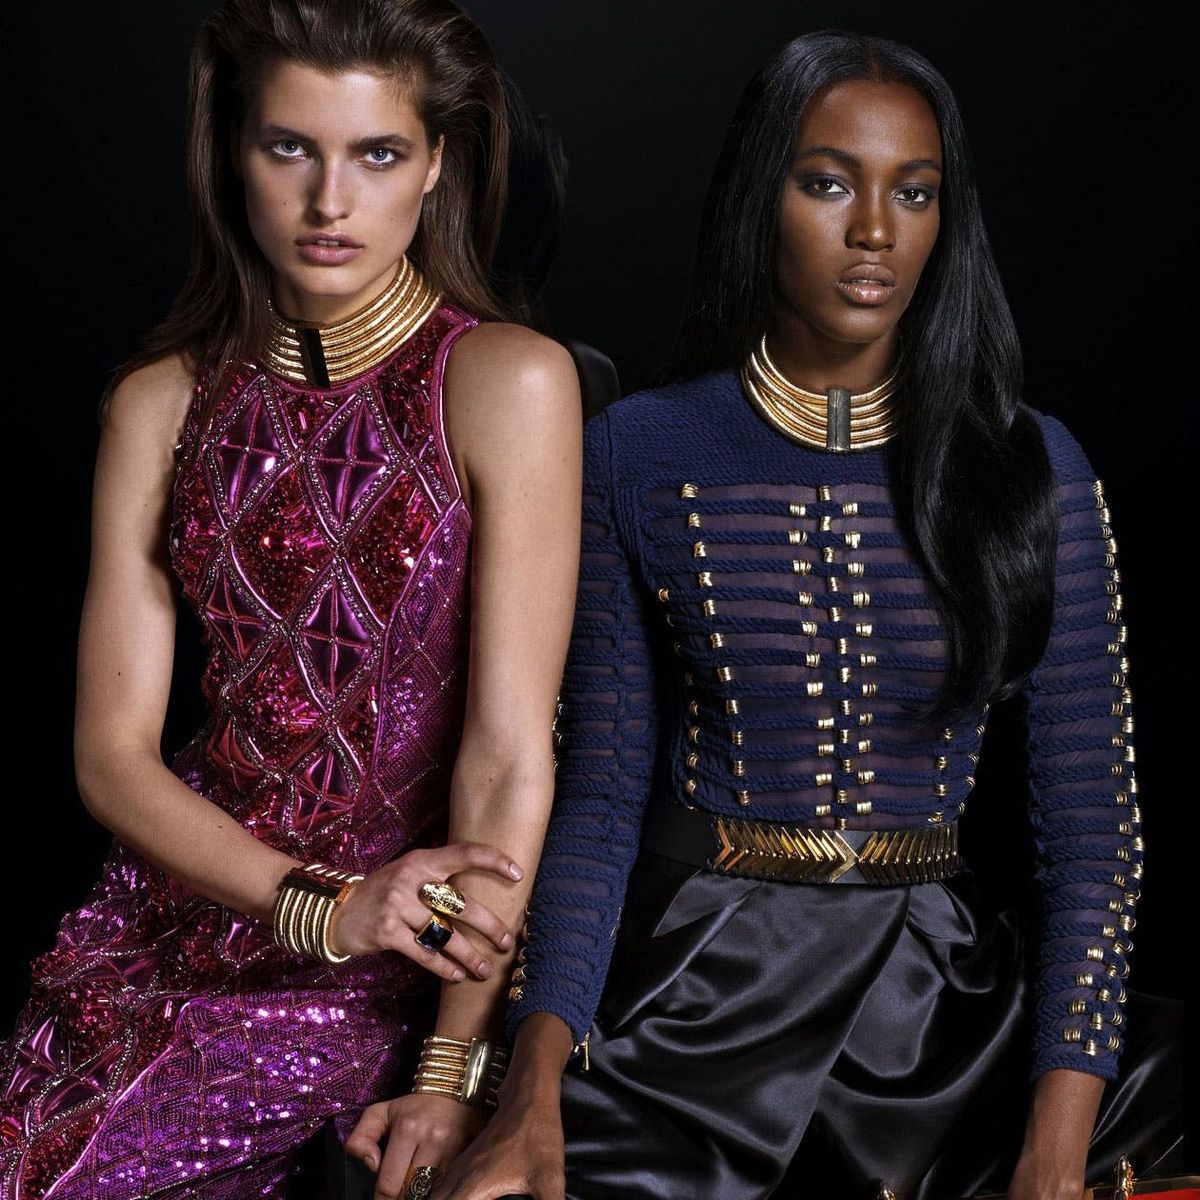 The Balmain + H&M Lookbook Is Everything Your Holiday Attire Needed and More